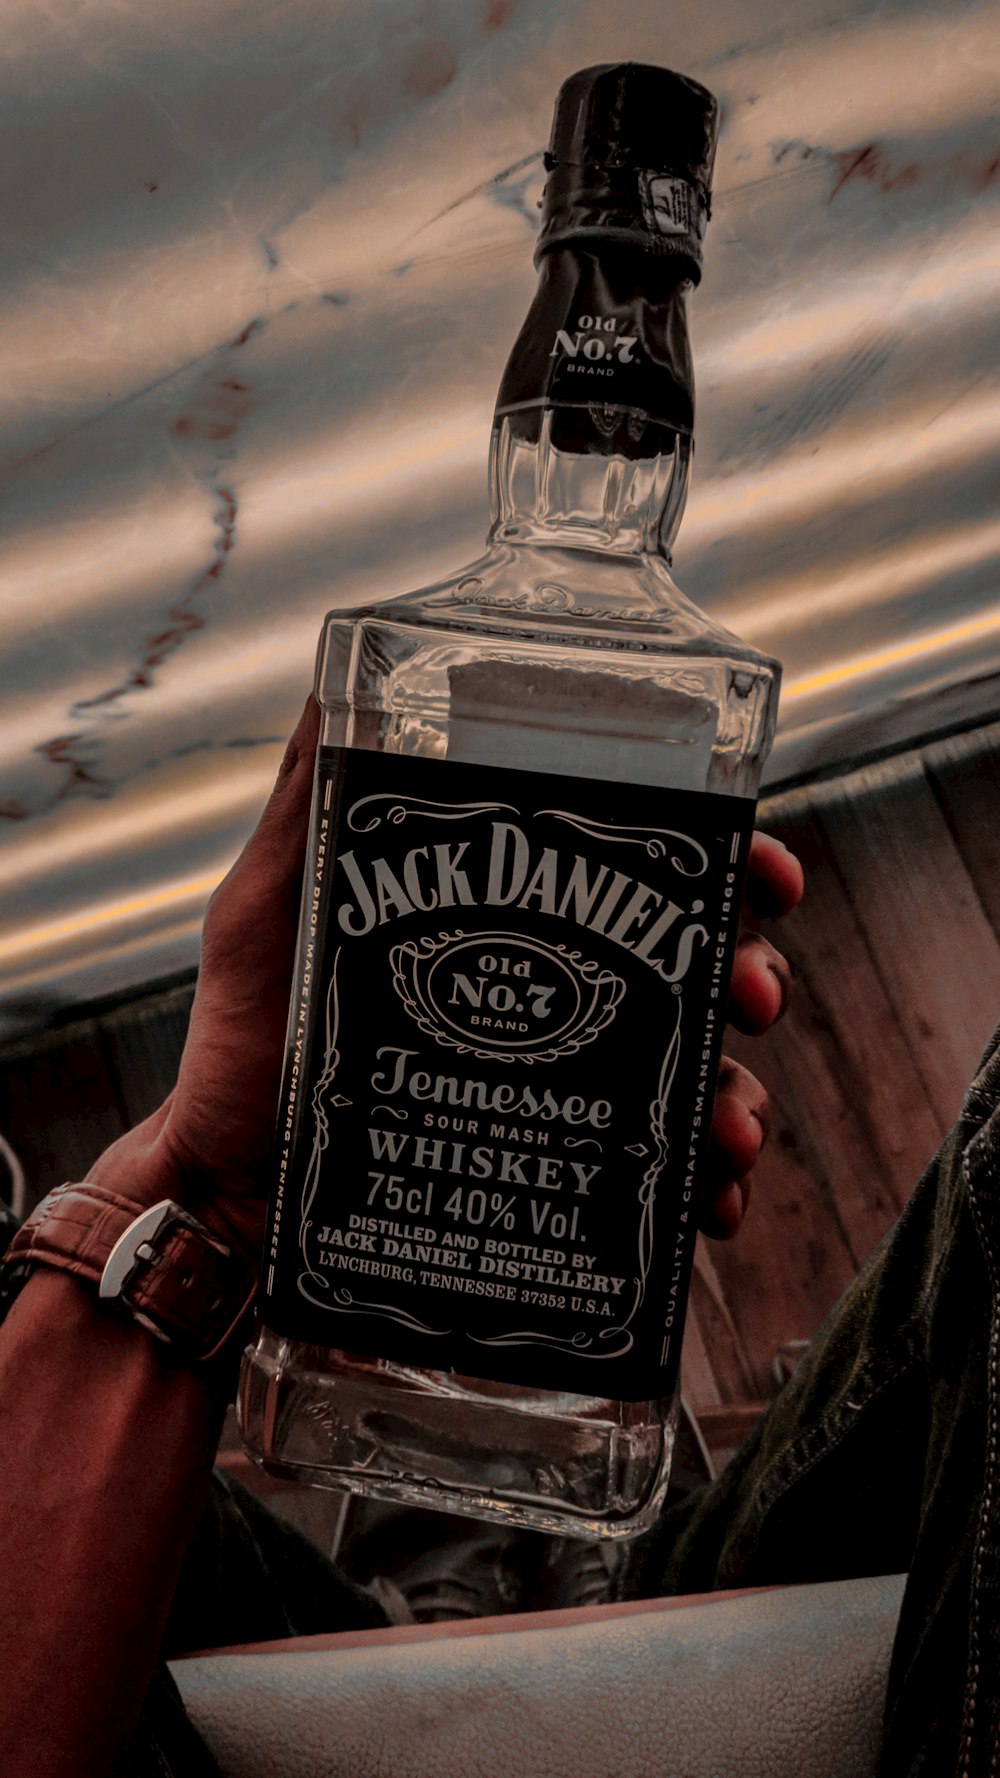 Whisky Jack Daniels Tennessee